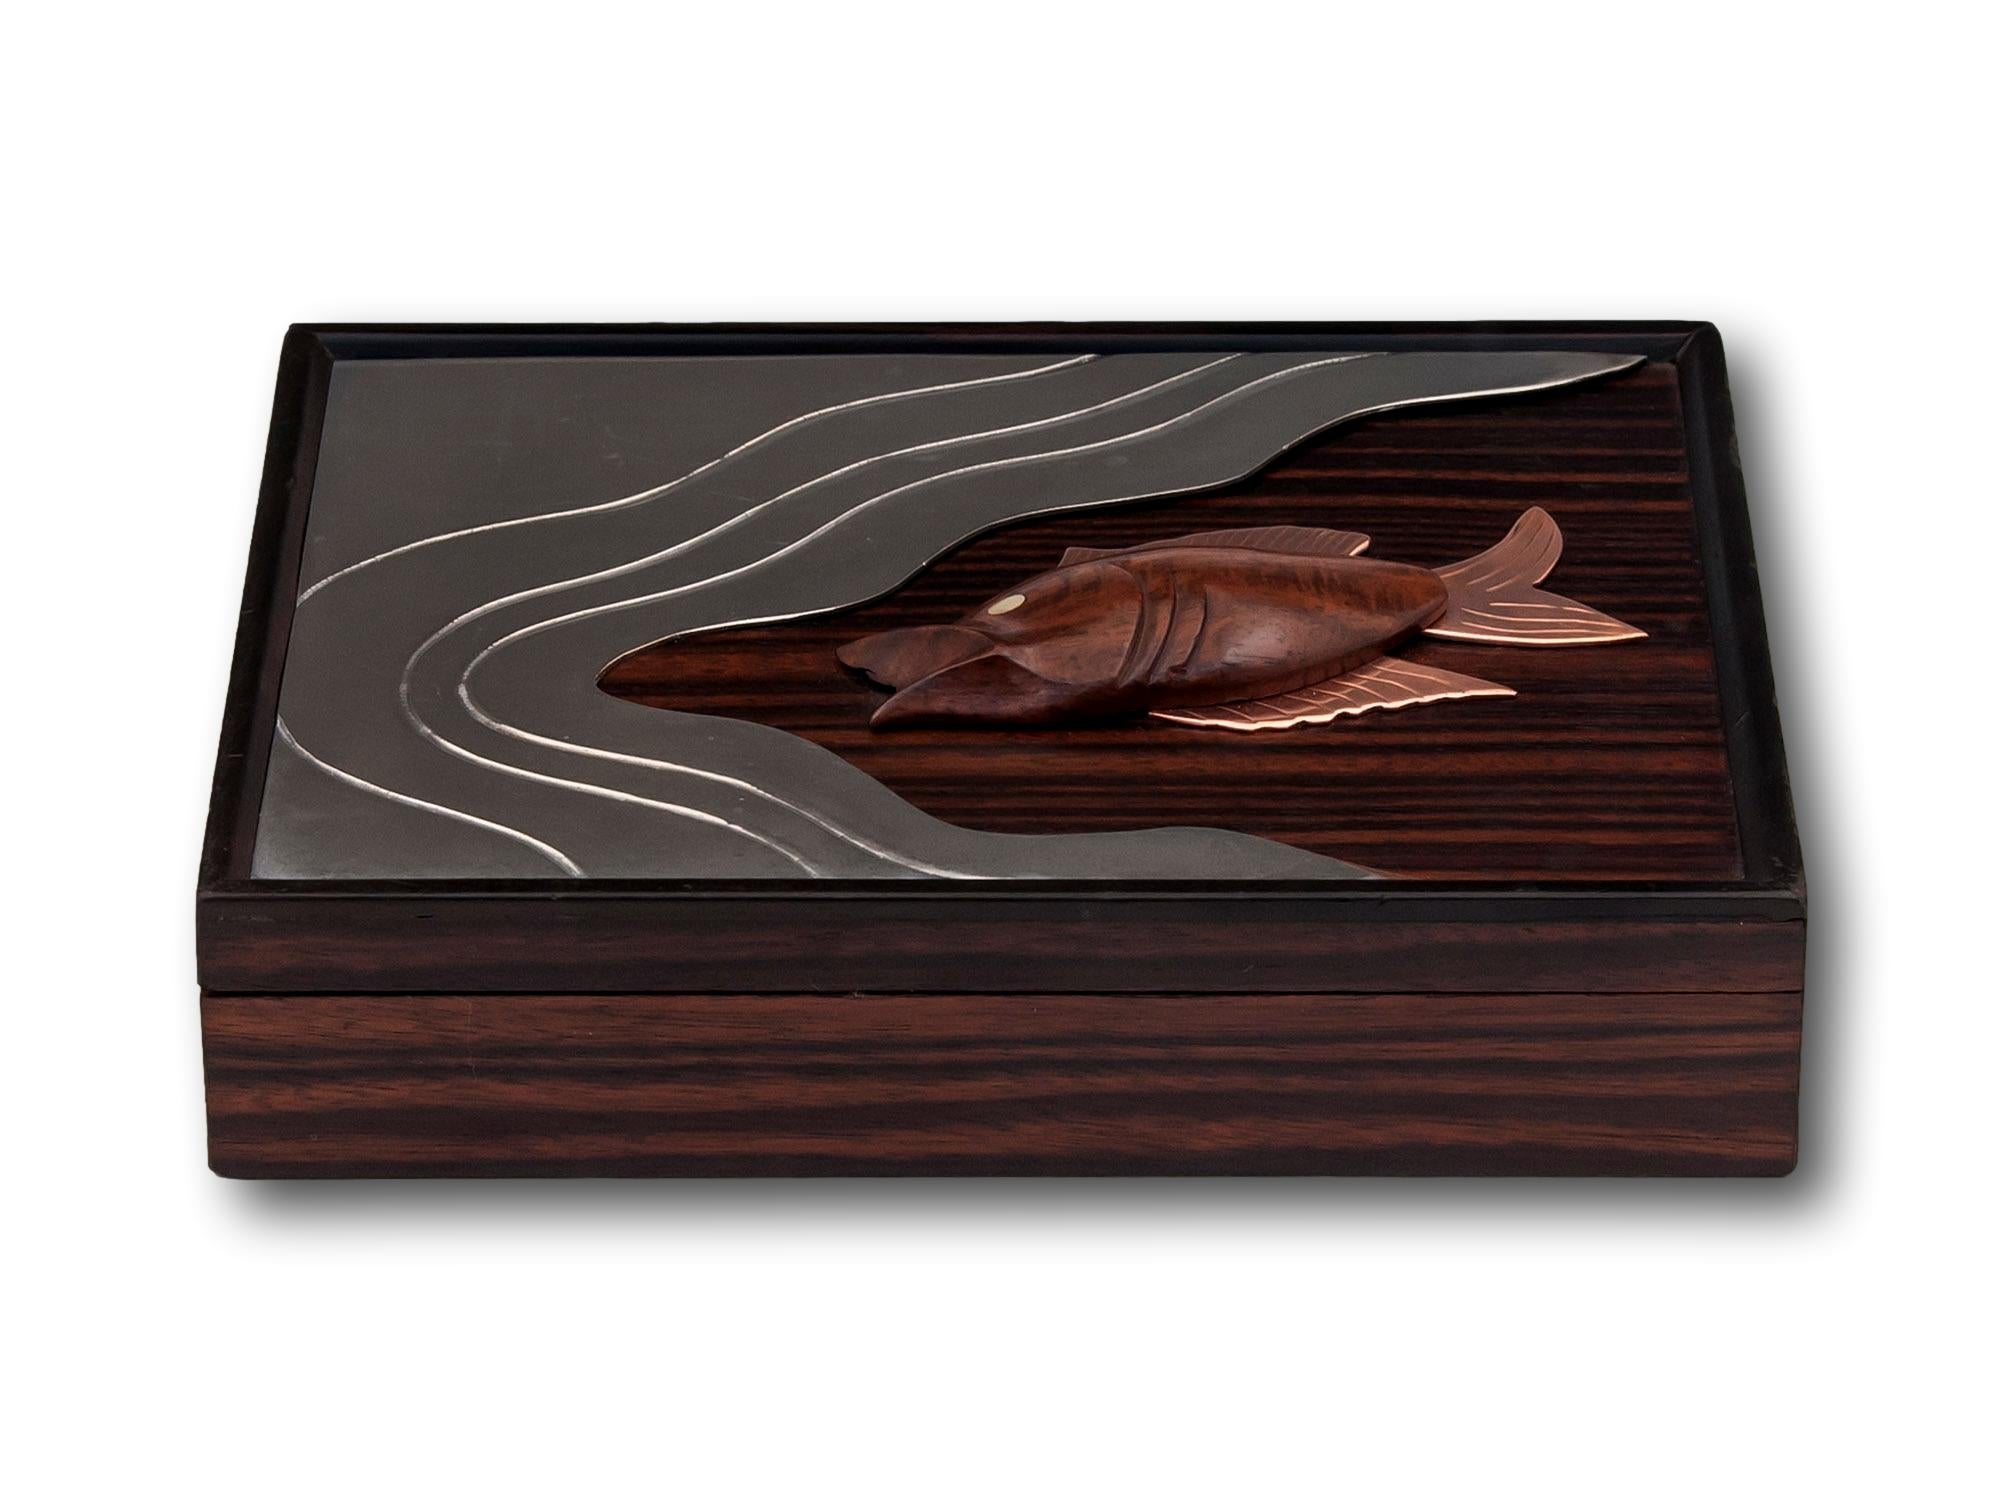 Lined in Royal Blue Padded Velvet

From our Boxes collection, we are pleased to offer this Art Deco Macassar Ebony Box. The box of slim rectangular form with an inset scene featuring a Fish with copper fins and a brass eye swimming with chrome